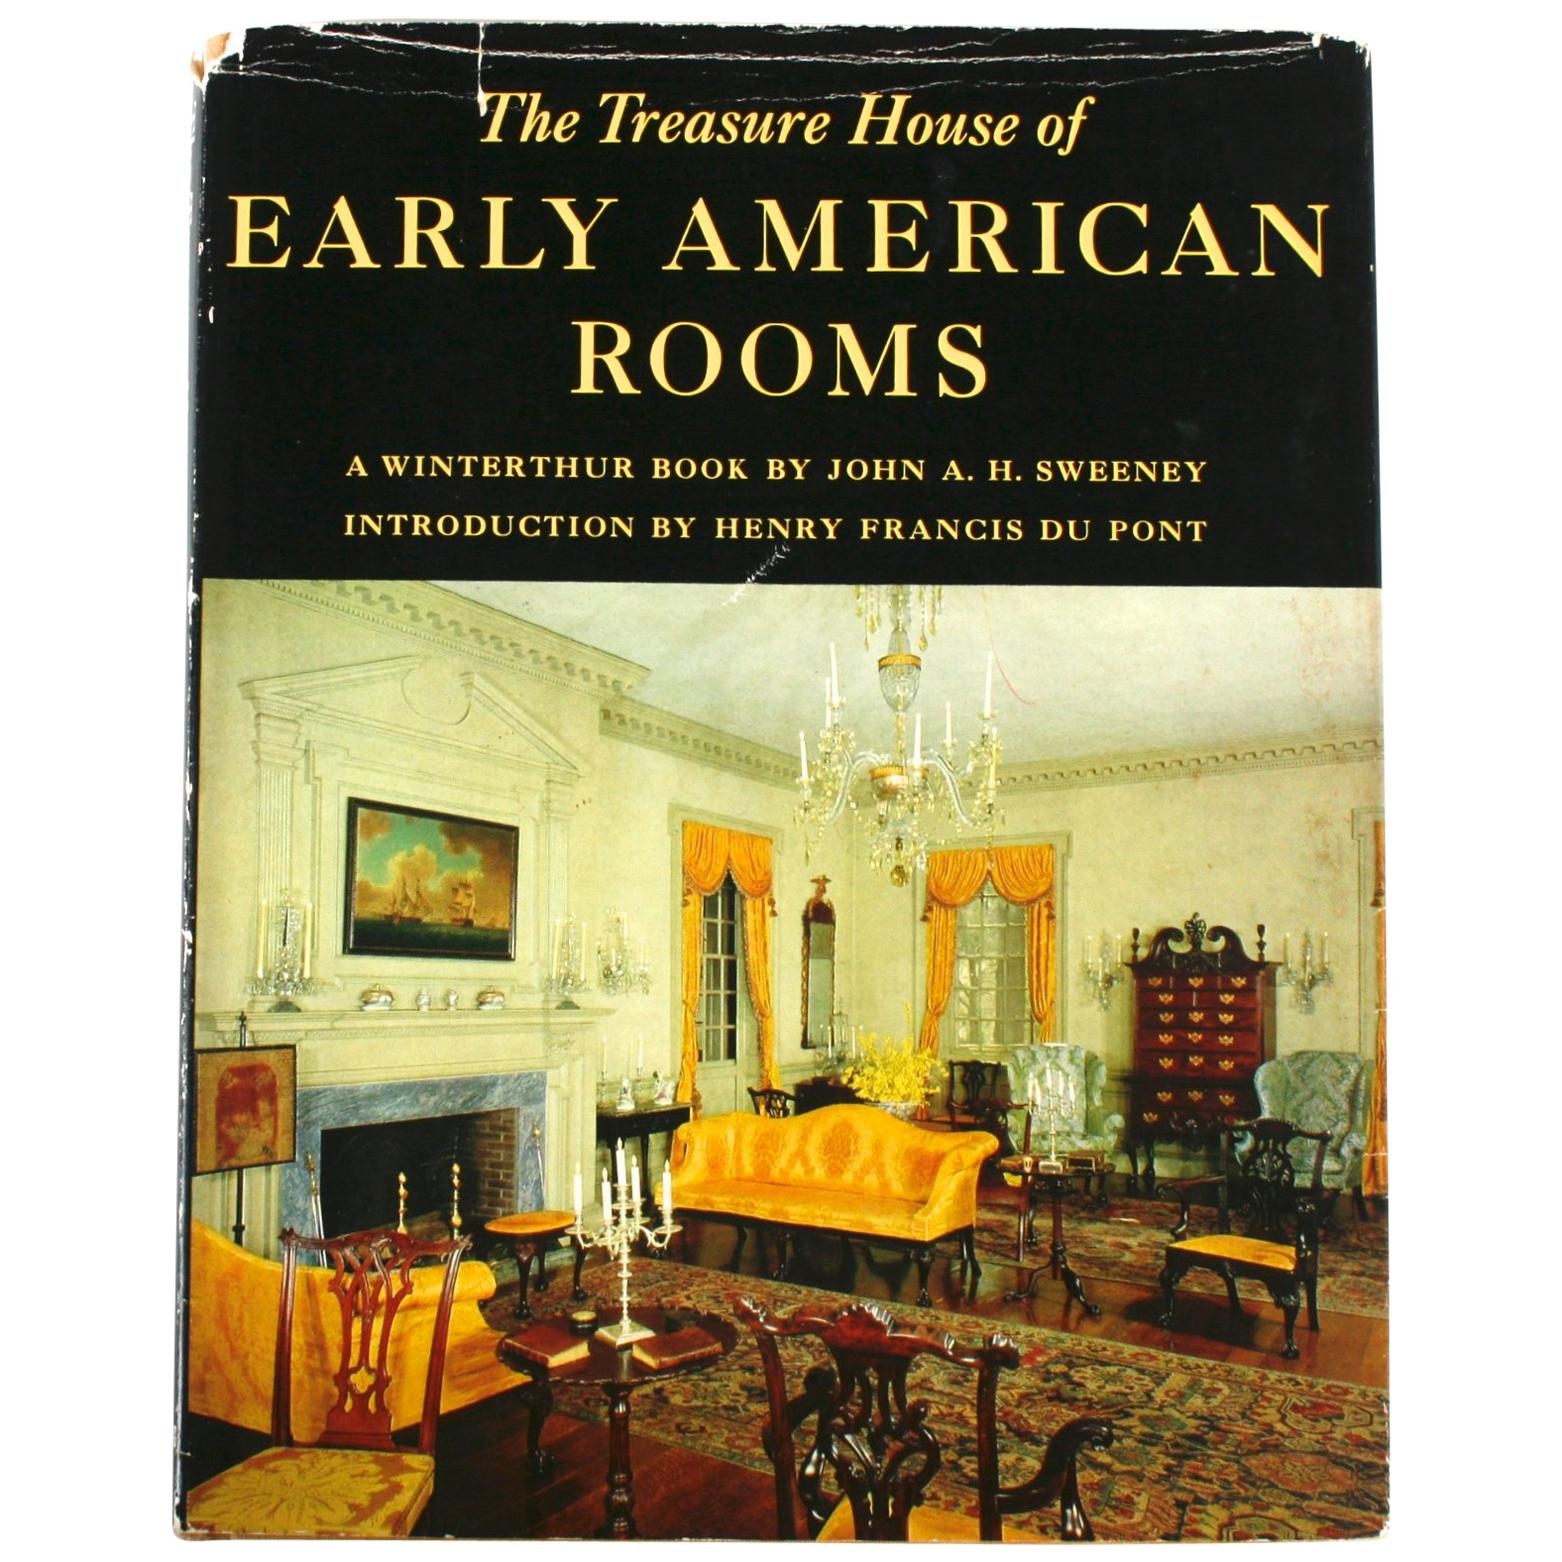 Treasure House of Early American Rooms by John A. Sweeney, First Edition